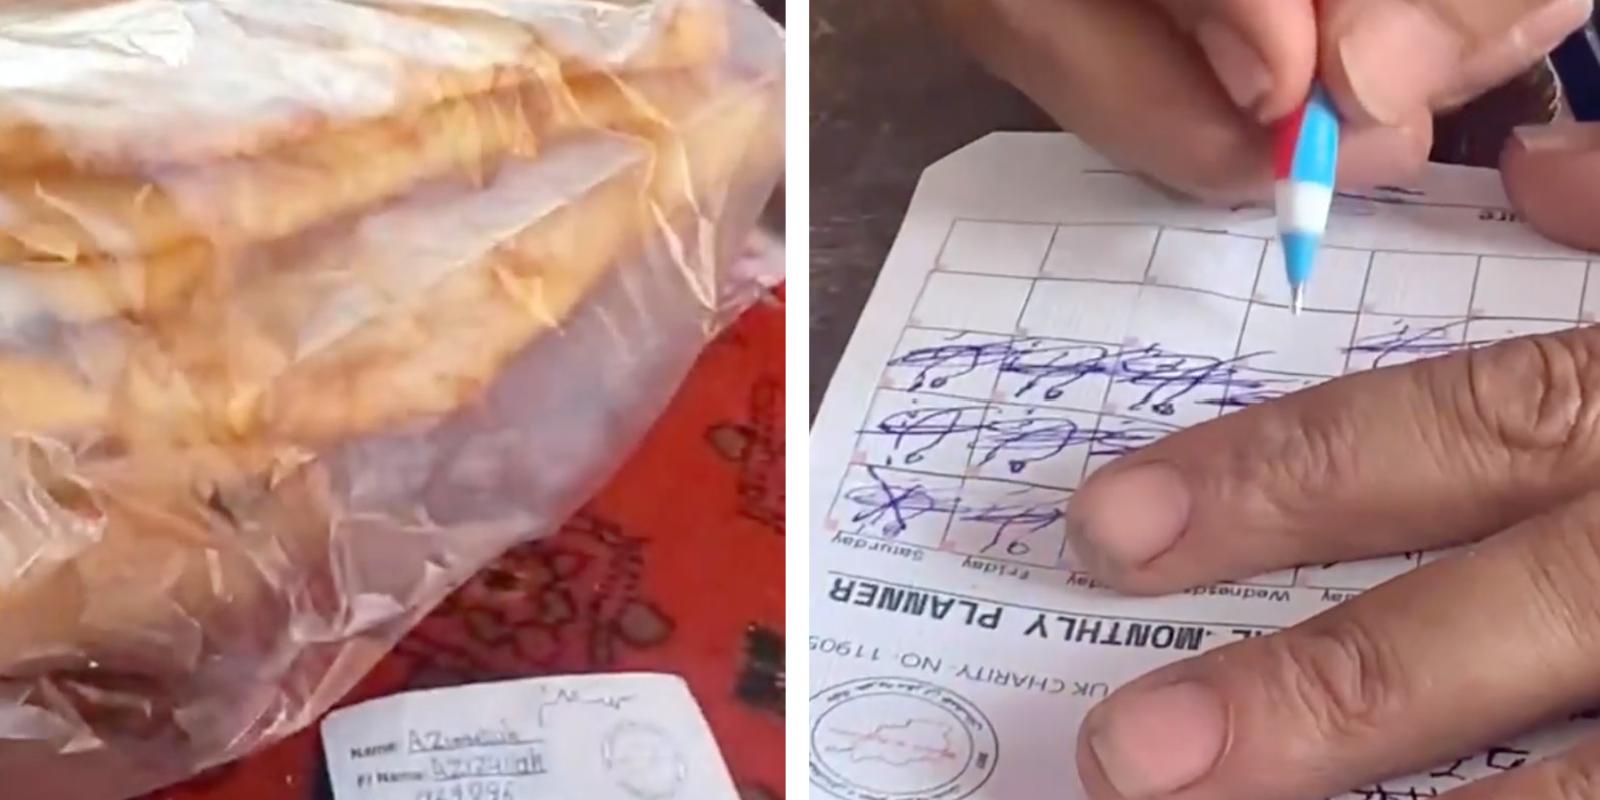 Vouchers are signed by the bakery